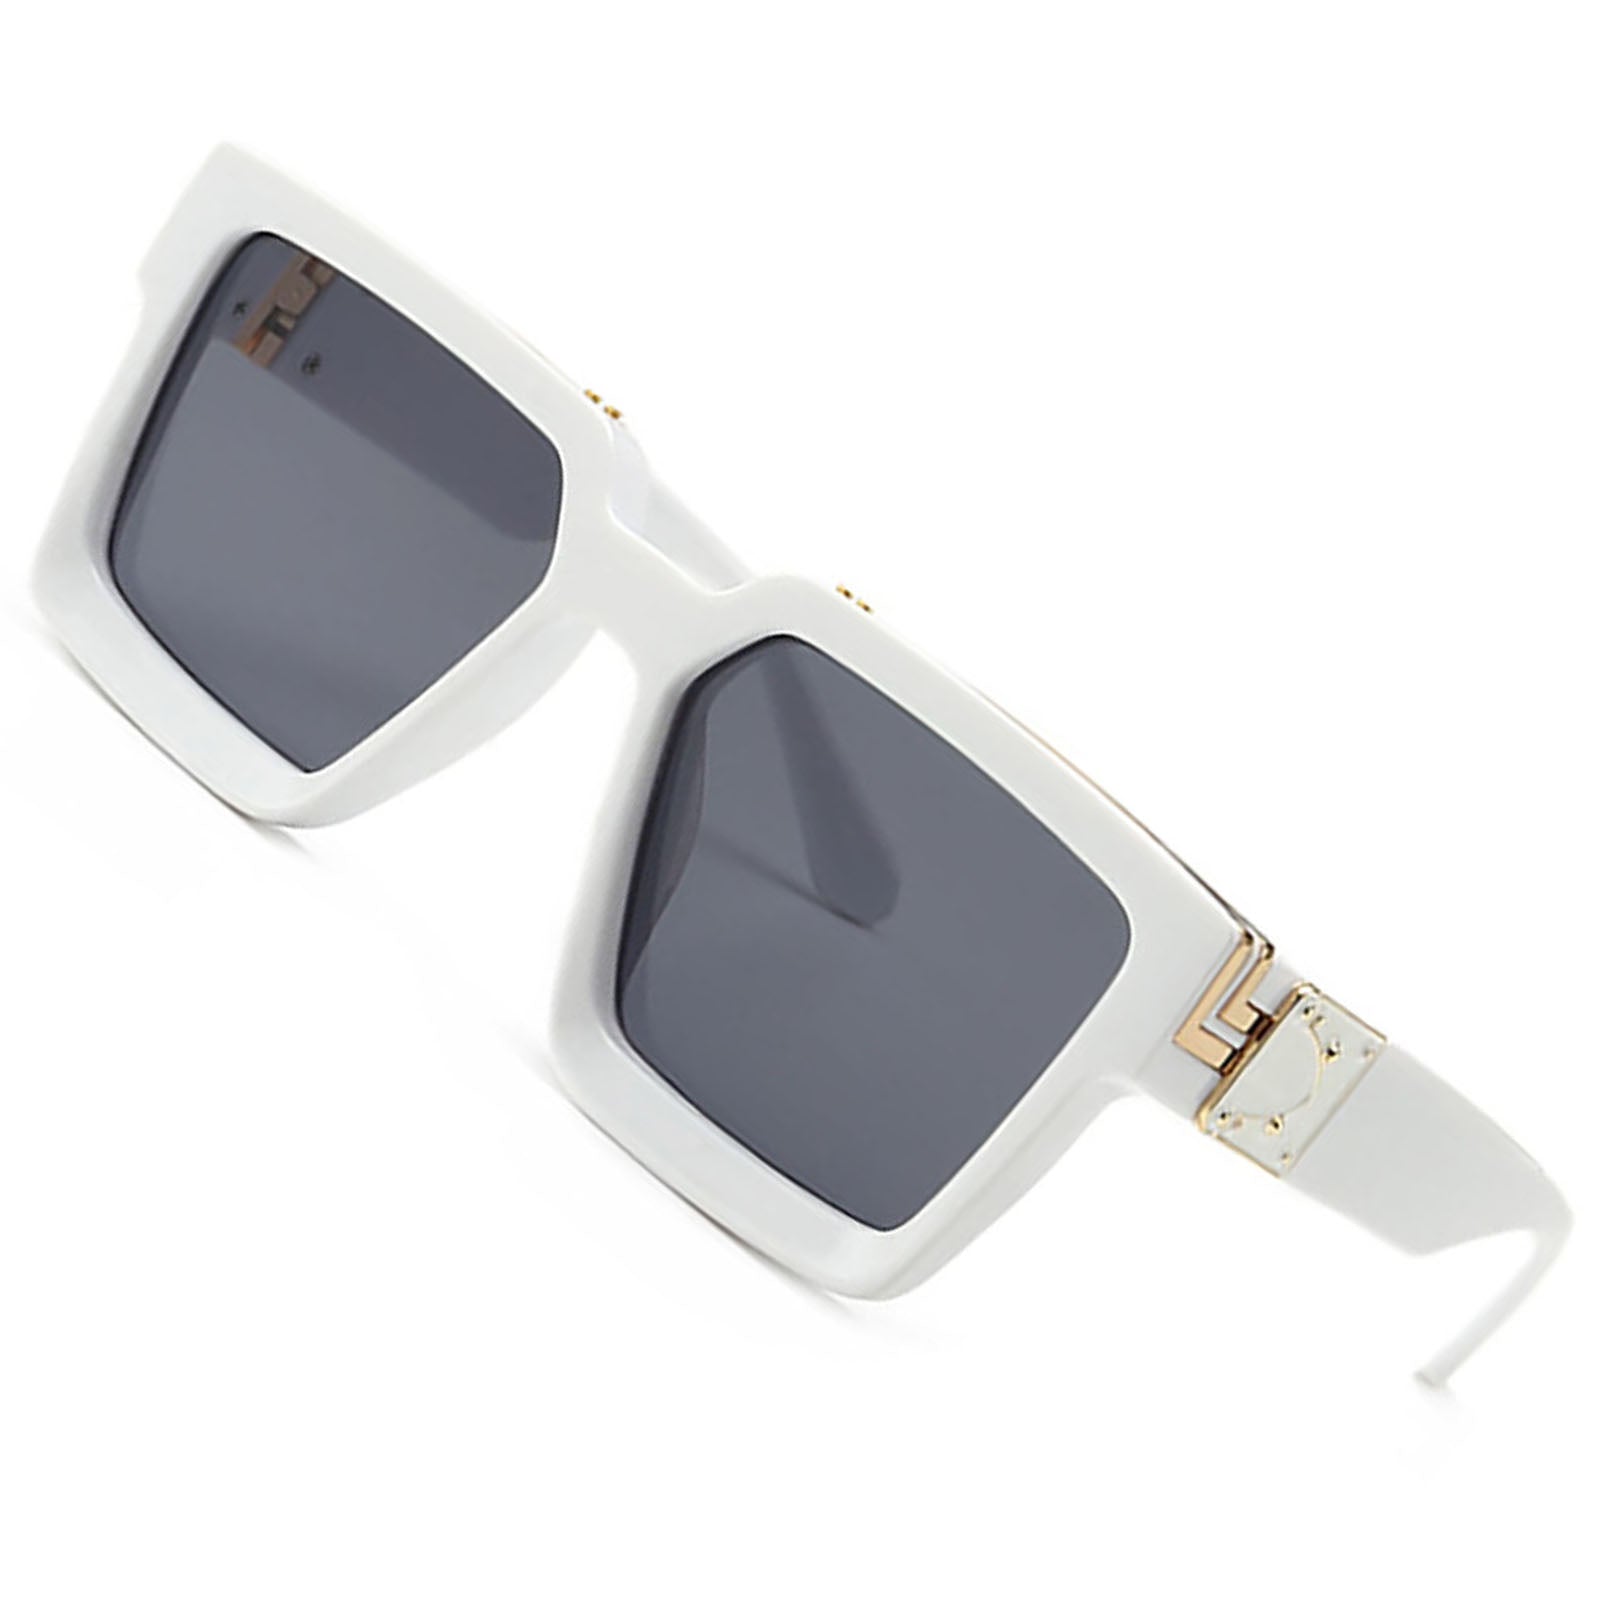 Designer Polarized Villain Sunglasses For Men And Women Hip Hop Luxury  Classics With UV Protection And Gift Box From Roselucky1, $20.52